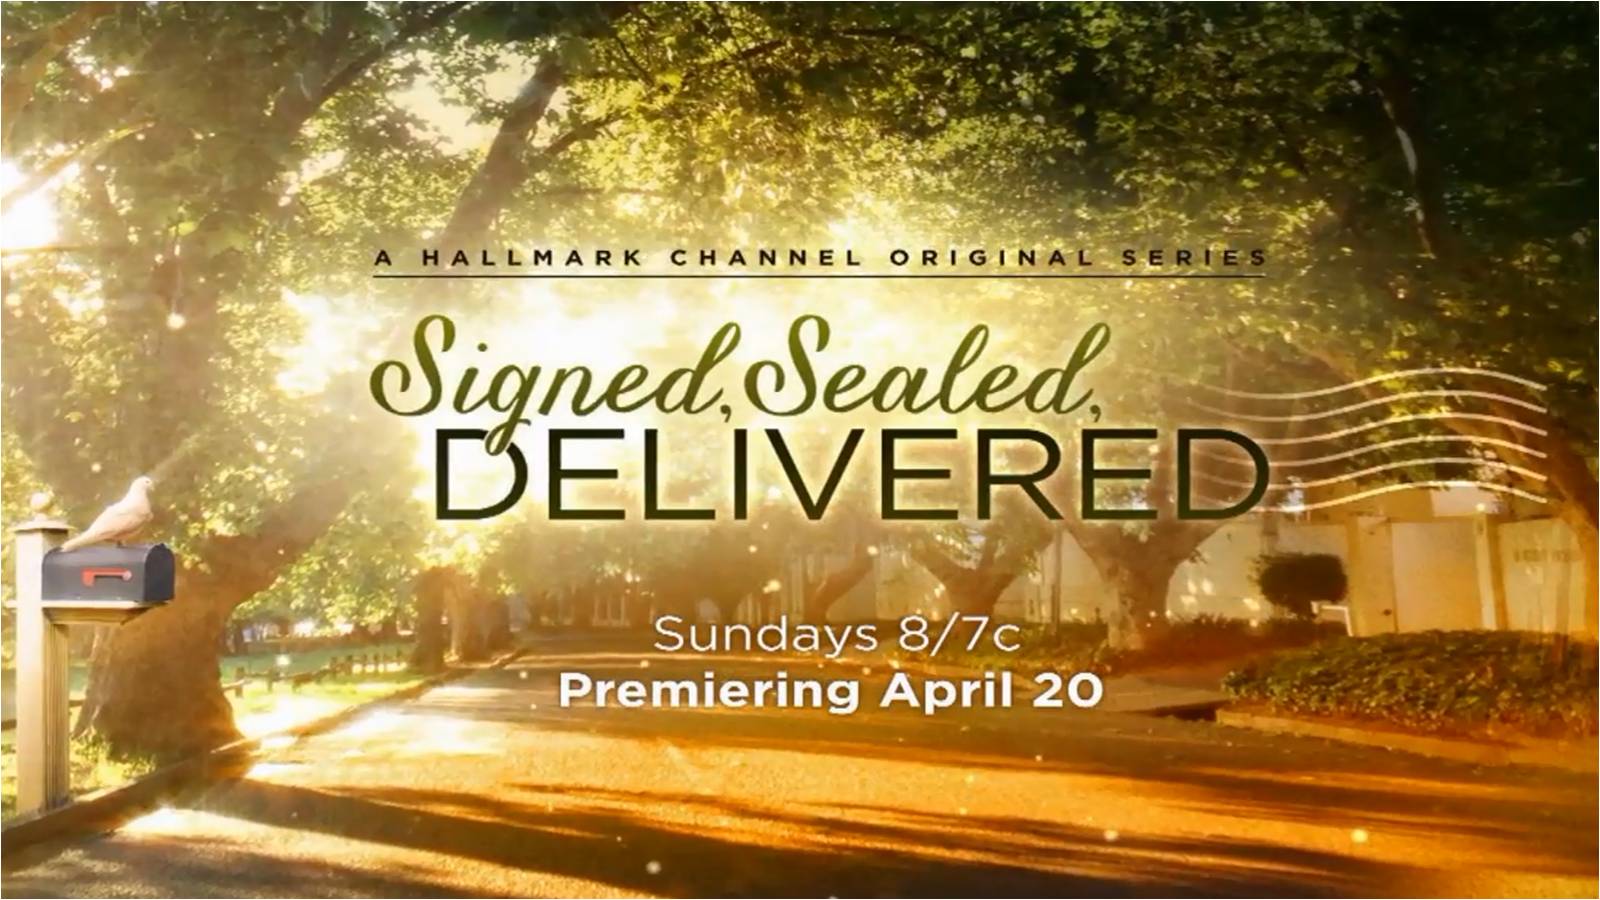 Watch the Trailers for Signed, Sealed Delivered